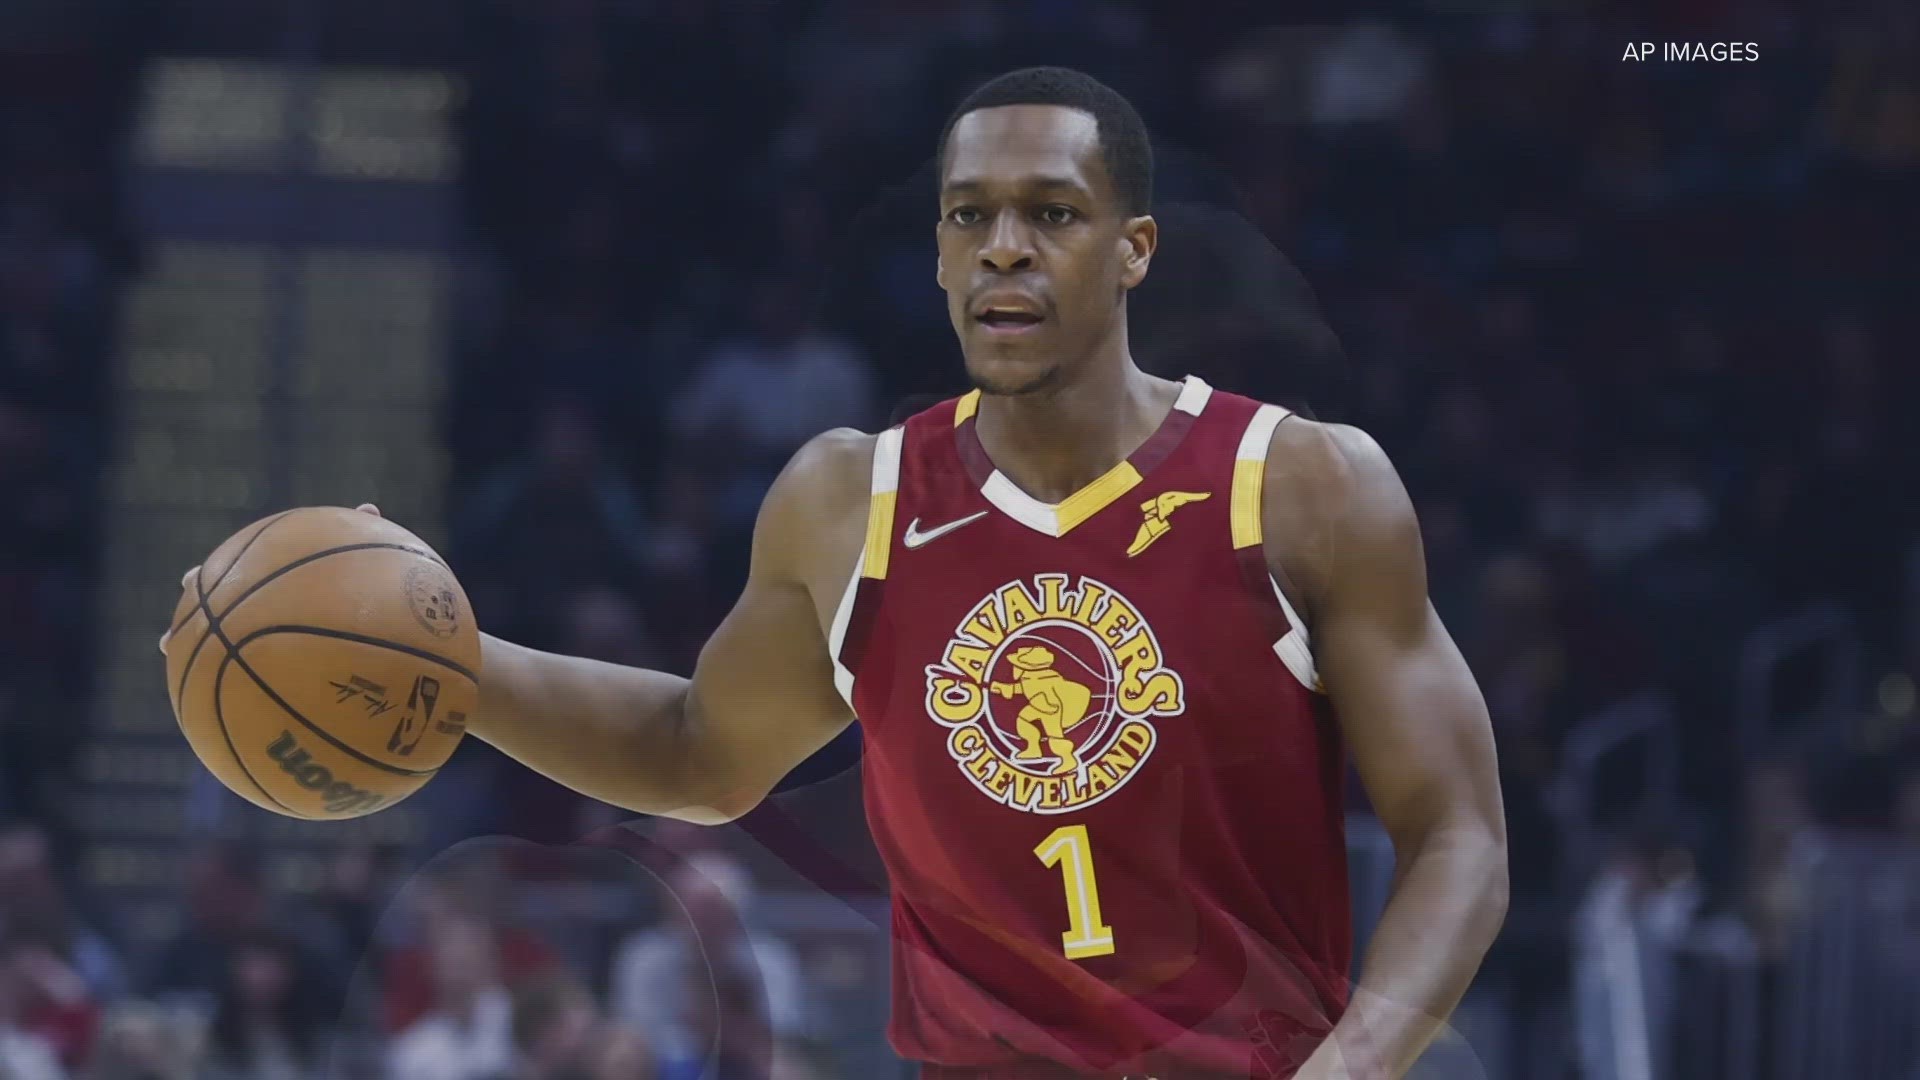 Rajon Rondo, former UK basketball player who played 16 years in the NBA, was arrested on firearm and drug charges Sunday.